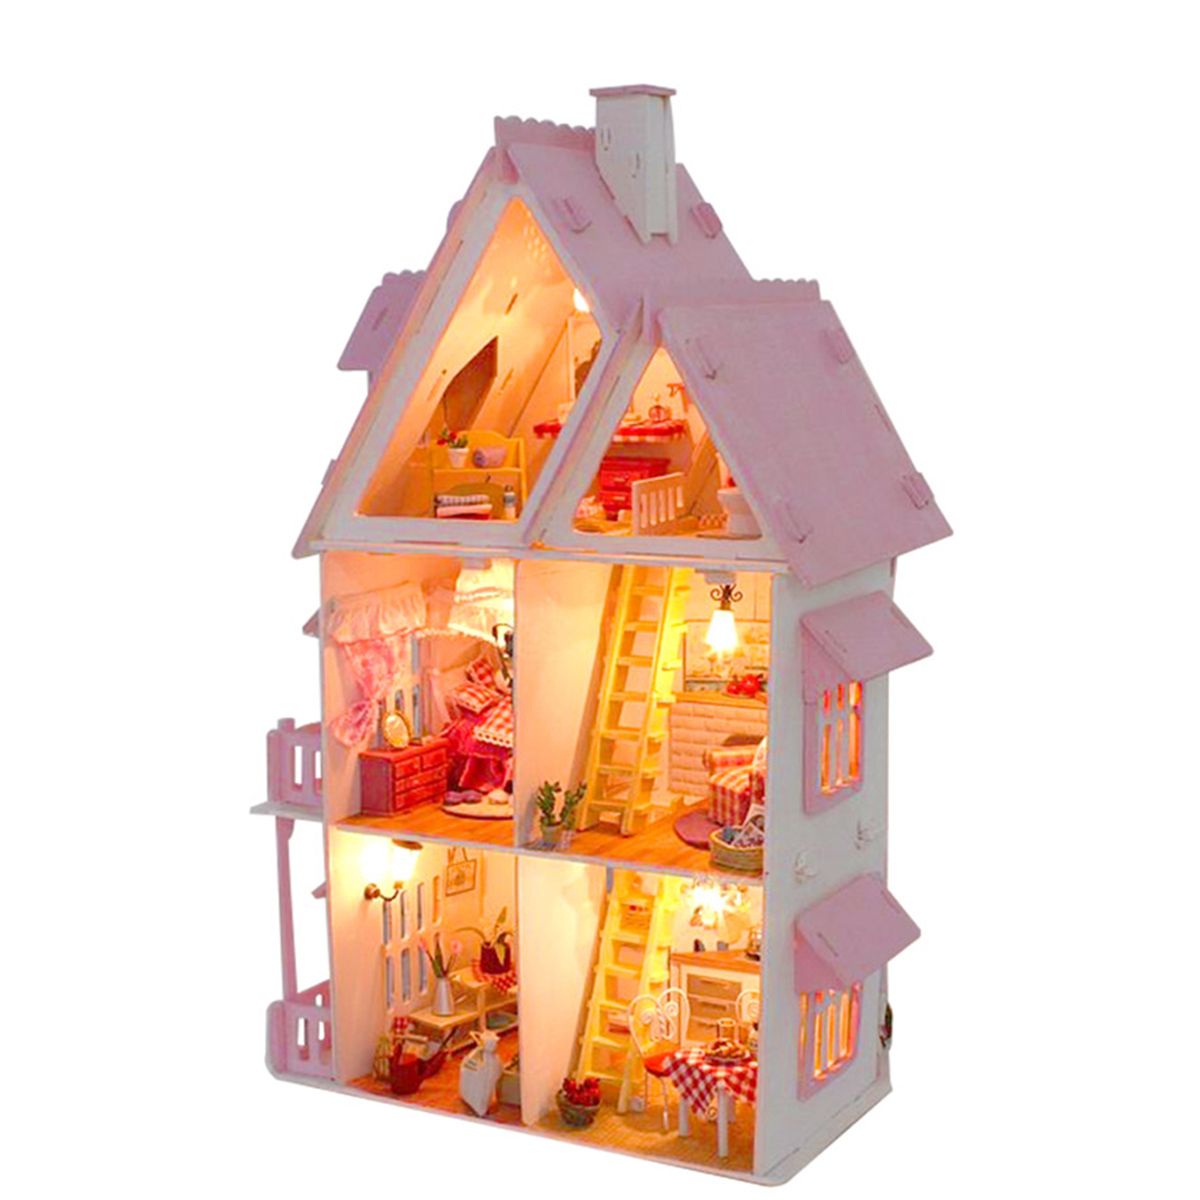 DIY-Wooden-Dolls-House-Doll-House-LED-Light-Miniature-Dollhouse-w-Furniture-Doll-House-Accessories-1477001